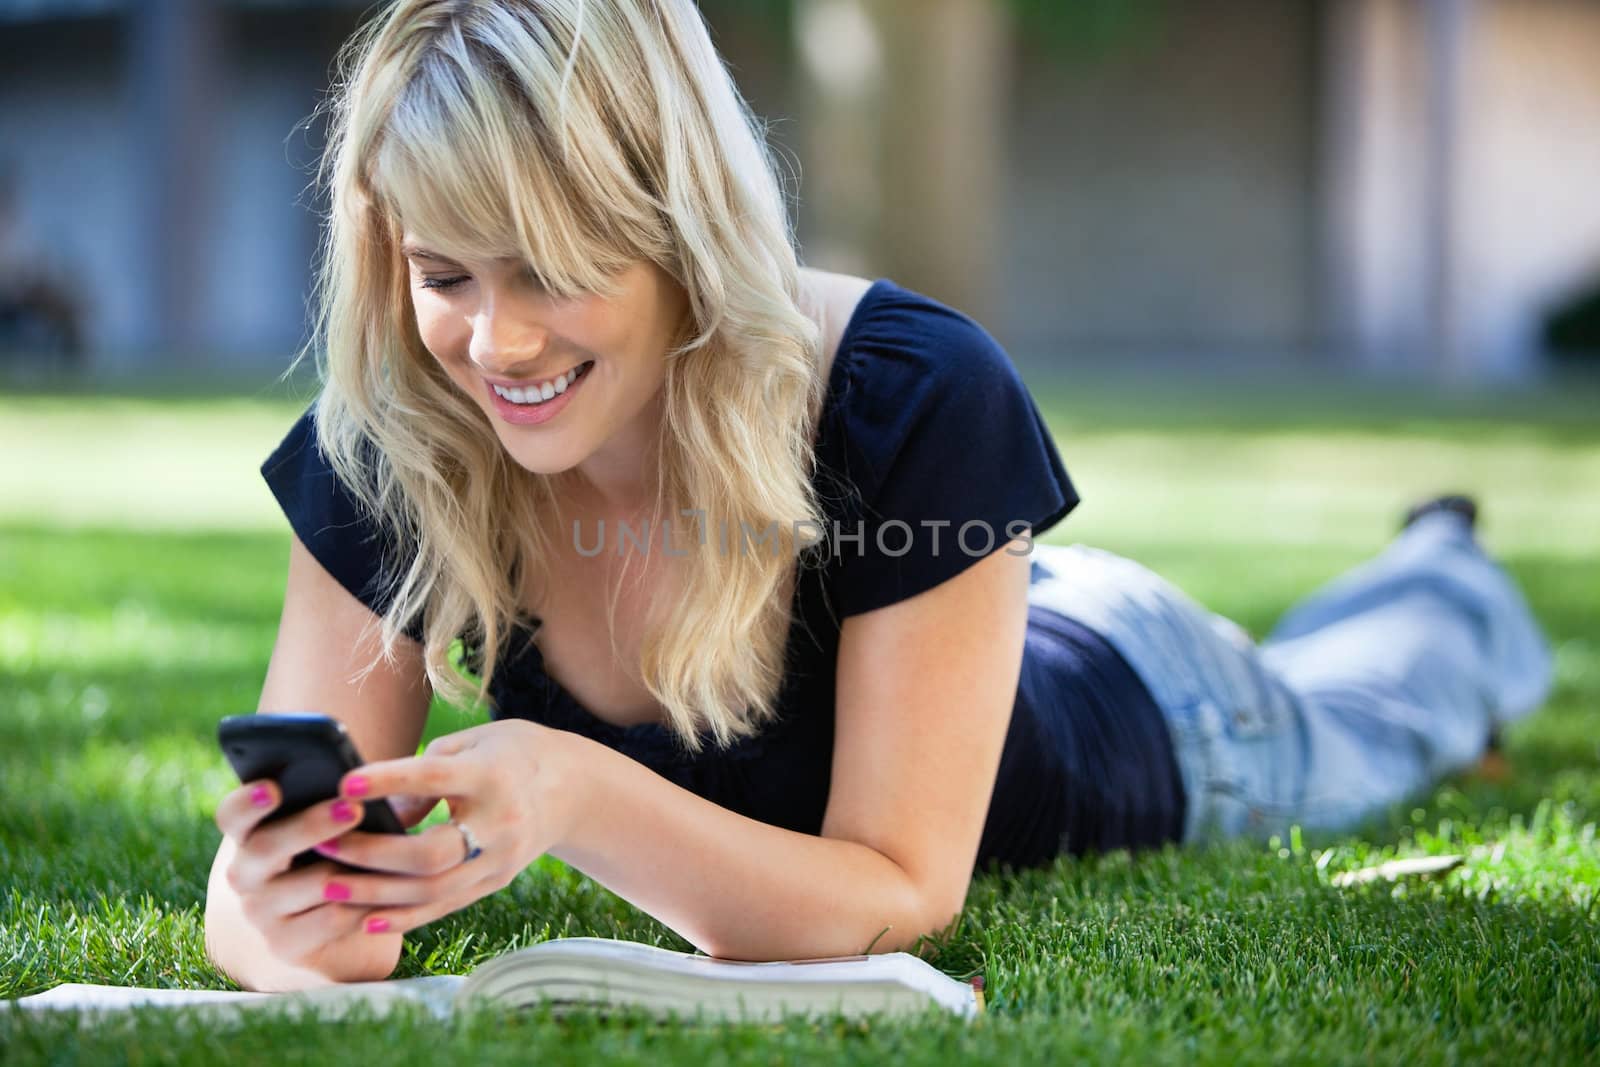 Smiling young college girl texting on a cell phone